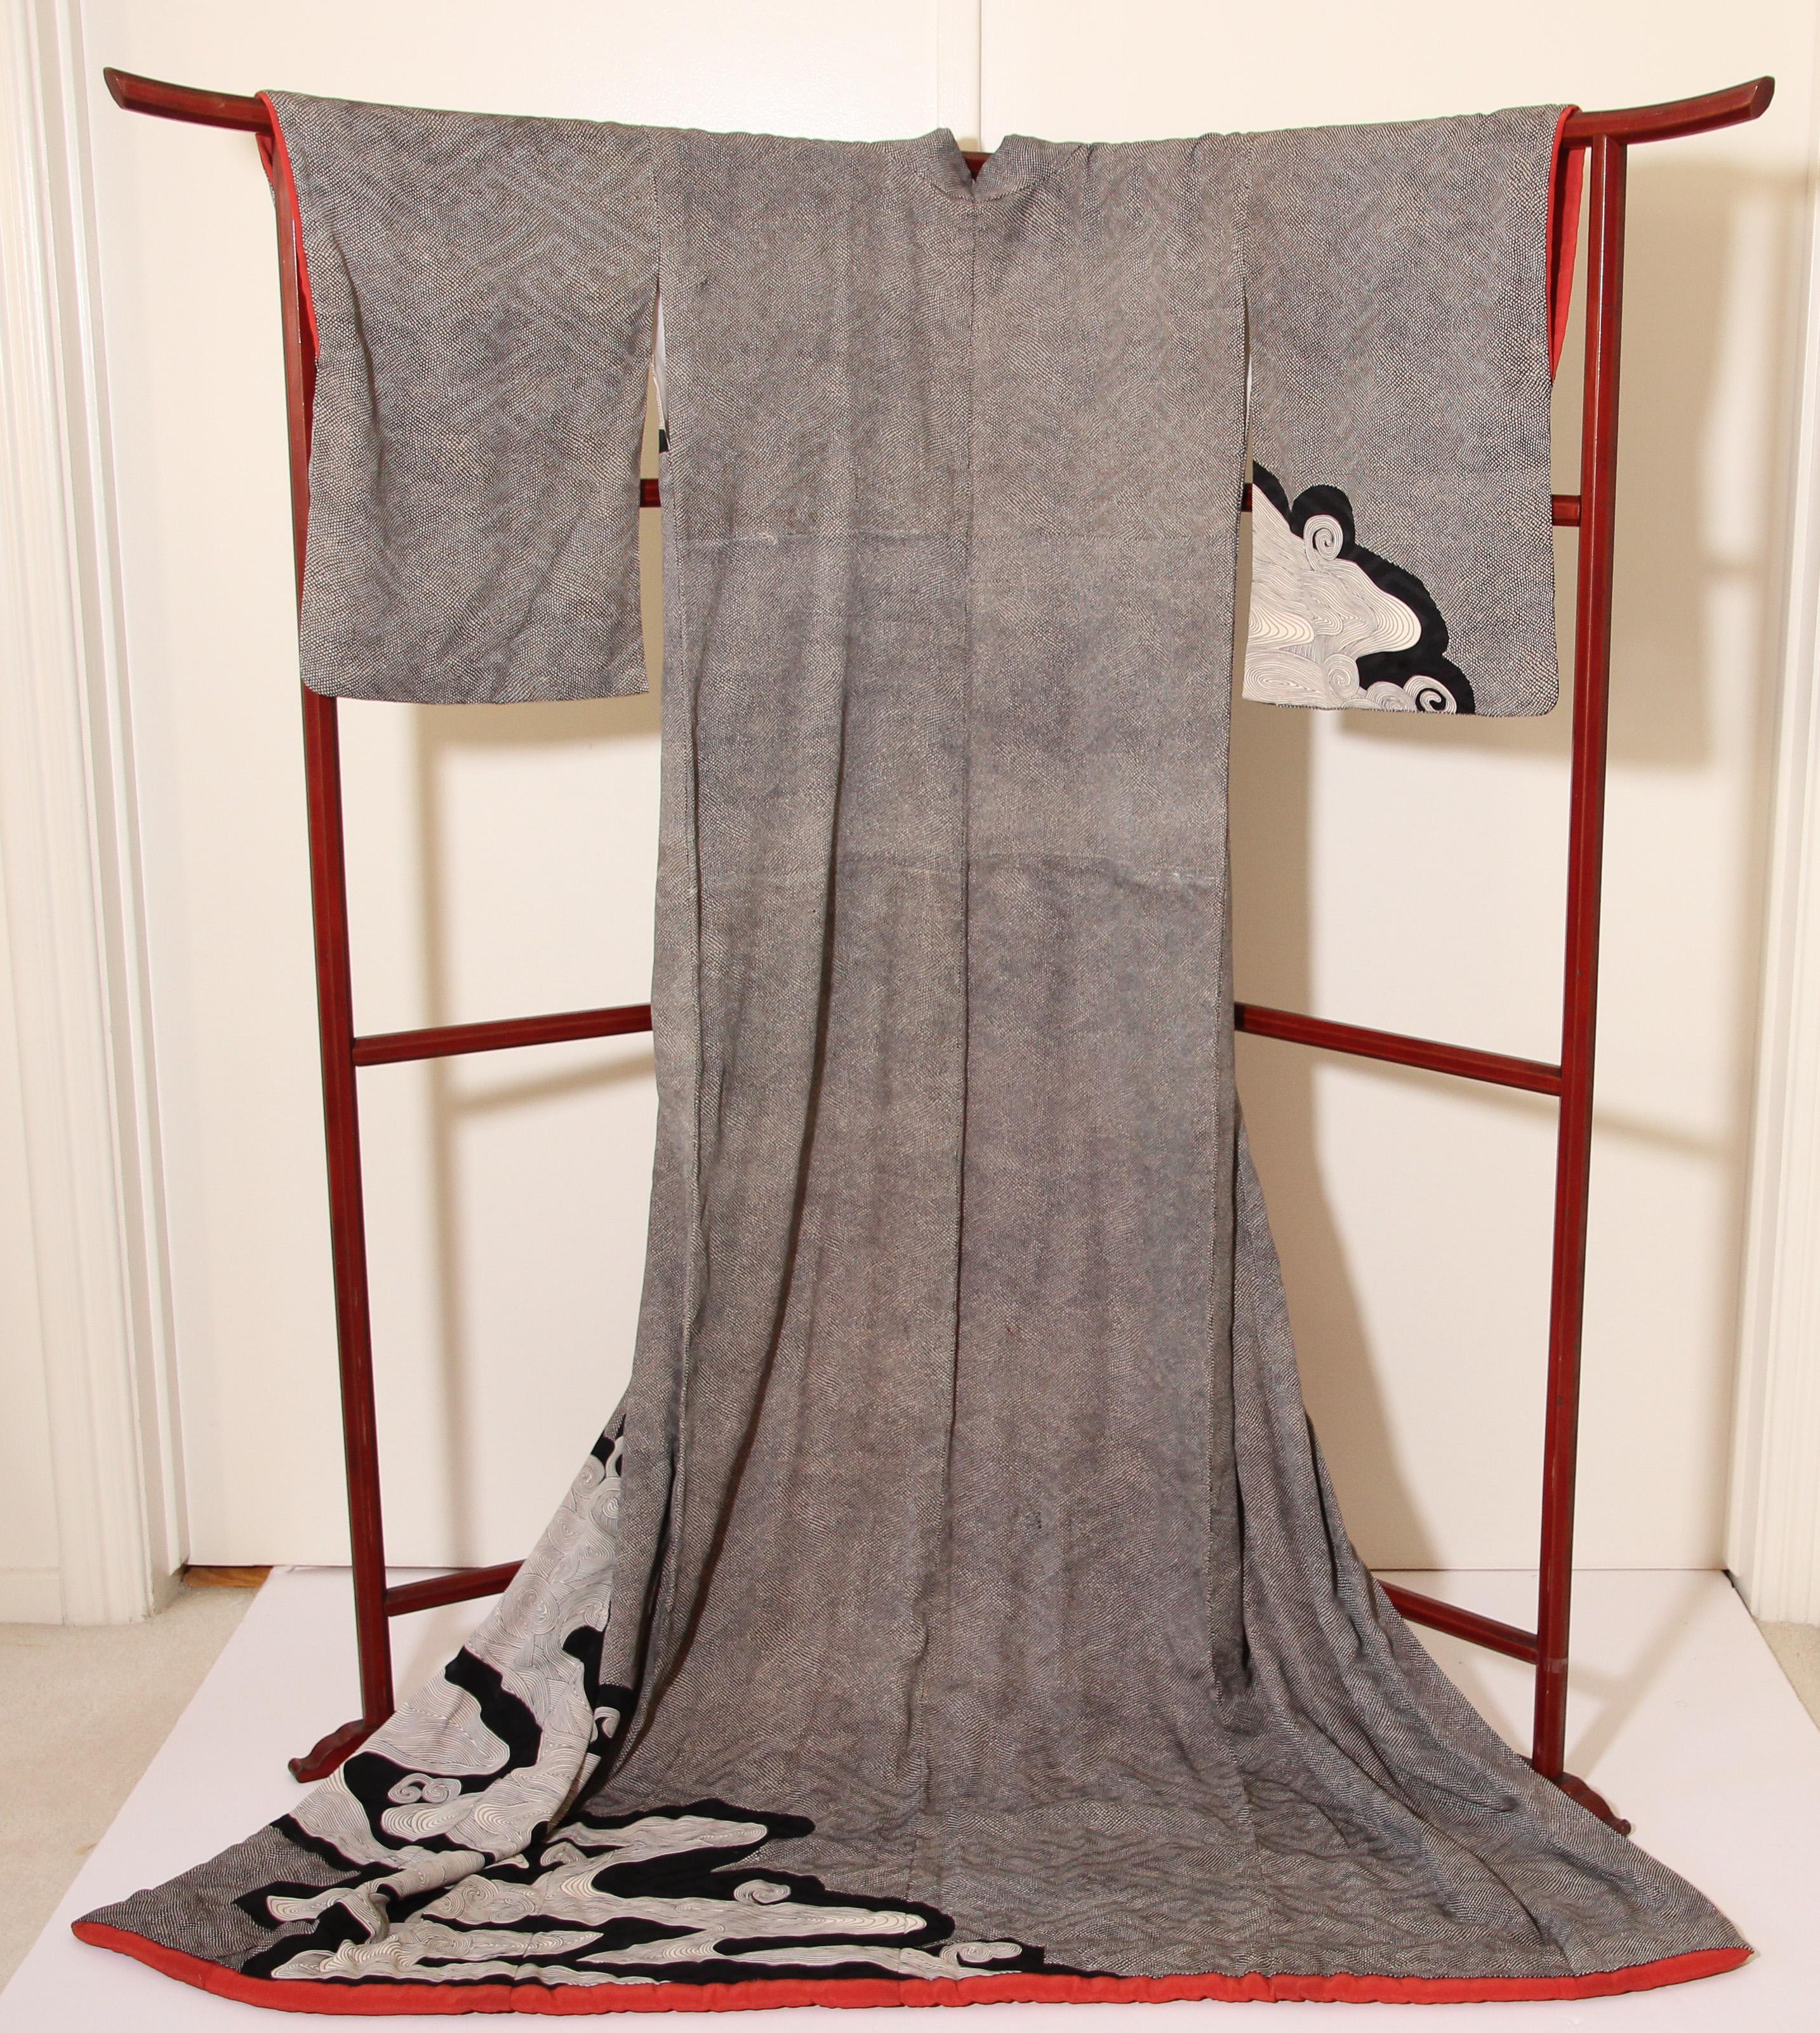 A fine Japanese Kuro Tomesode Kimono, circa 1950s.
silk kimono robe in dove grey with an abstract pattern.
The fine design was done with Yuzen, a painstaking resistant dye technique using rice starch. Yuzen was invented in the 17th century and